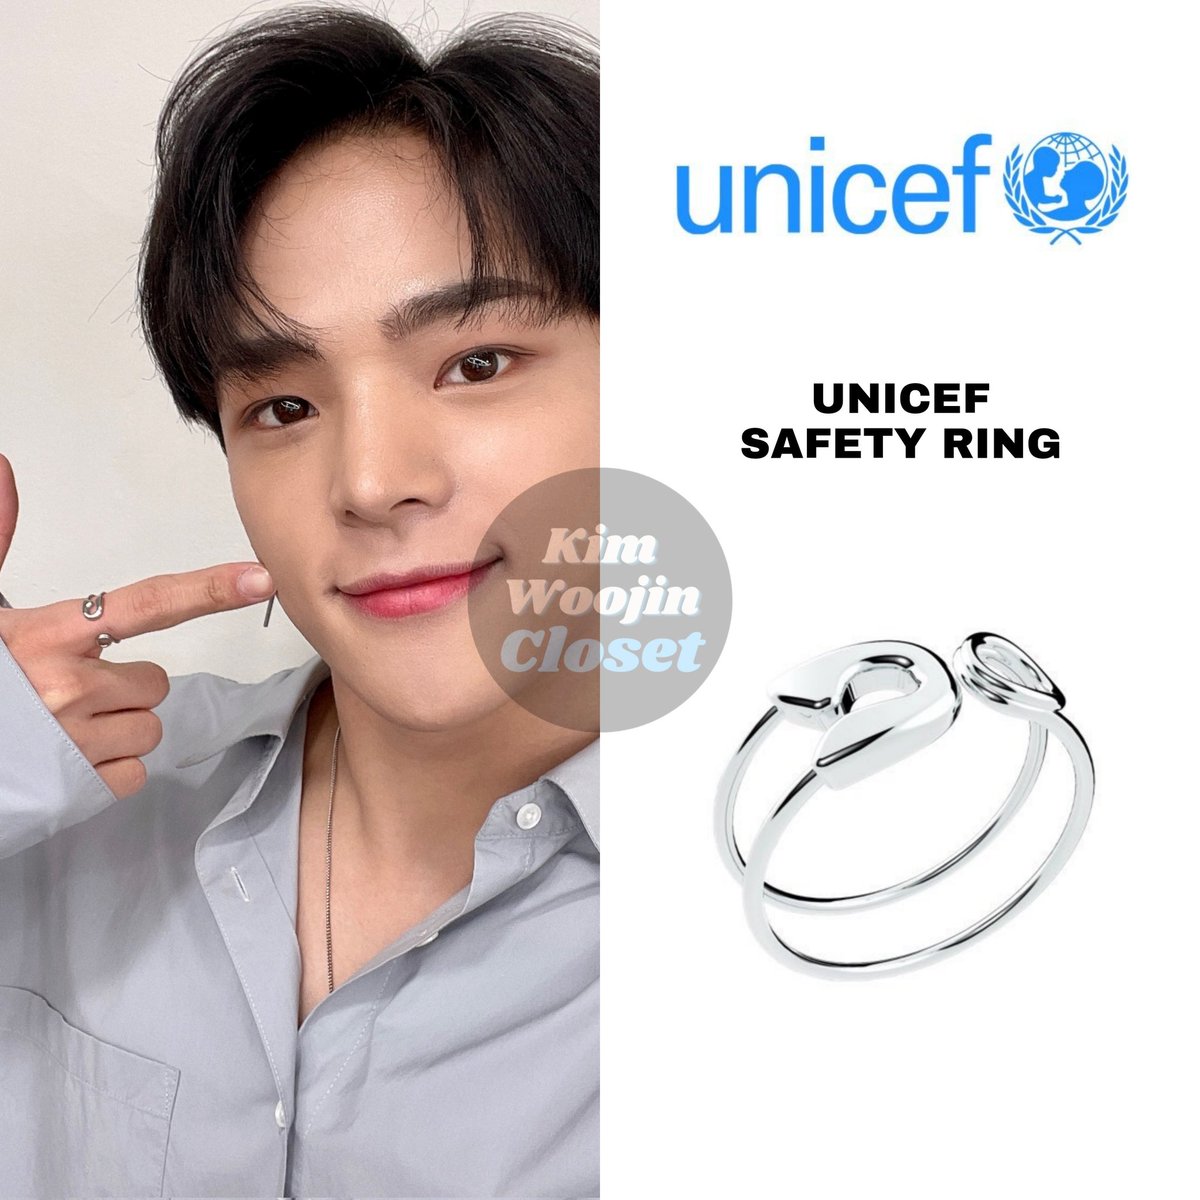 Money lending Arashigaoka bouquet KIM WOOJIN CLOSET on Twitter: "The UNICEF Safety Ring is given to  individuals who are regular sponsors of the For Every Child campaign. The  ring shaped as a safety pin is “a